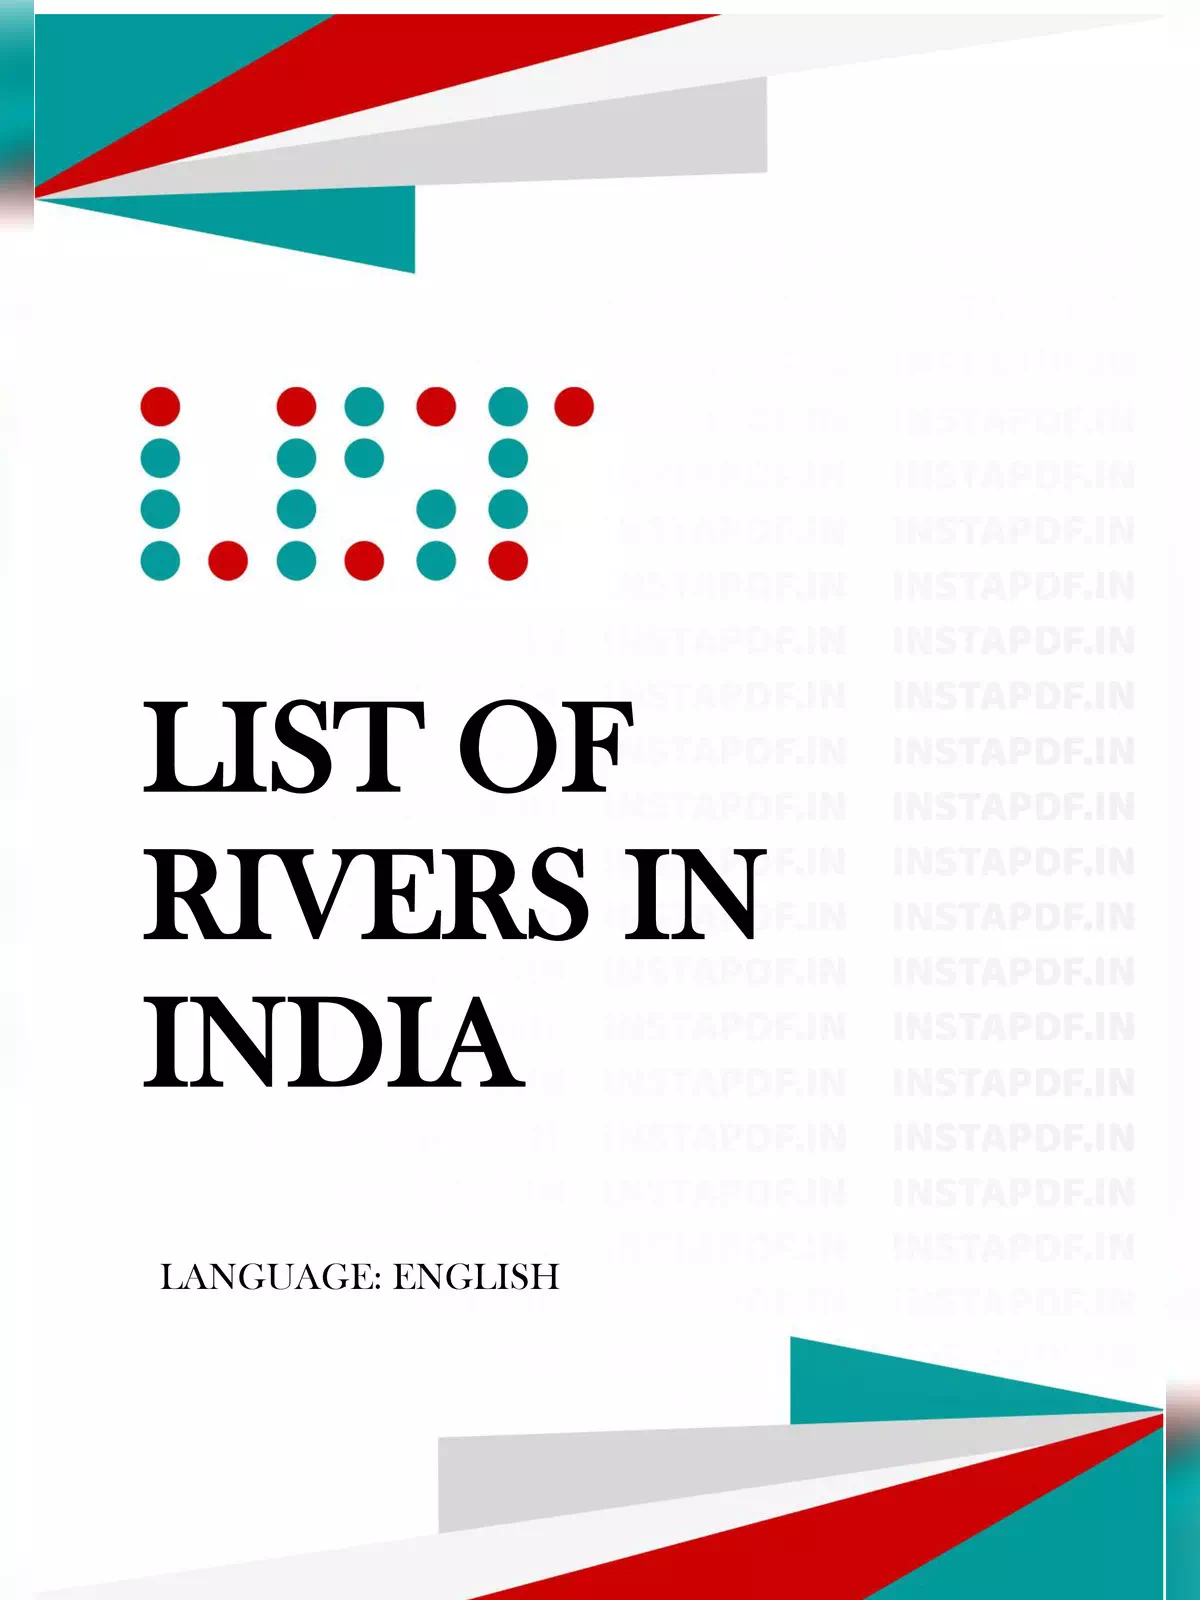 List of Rivers in India